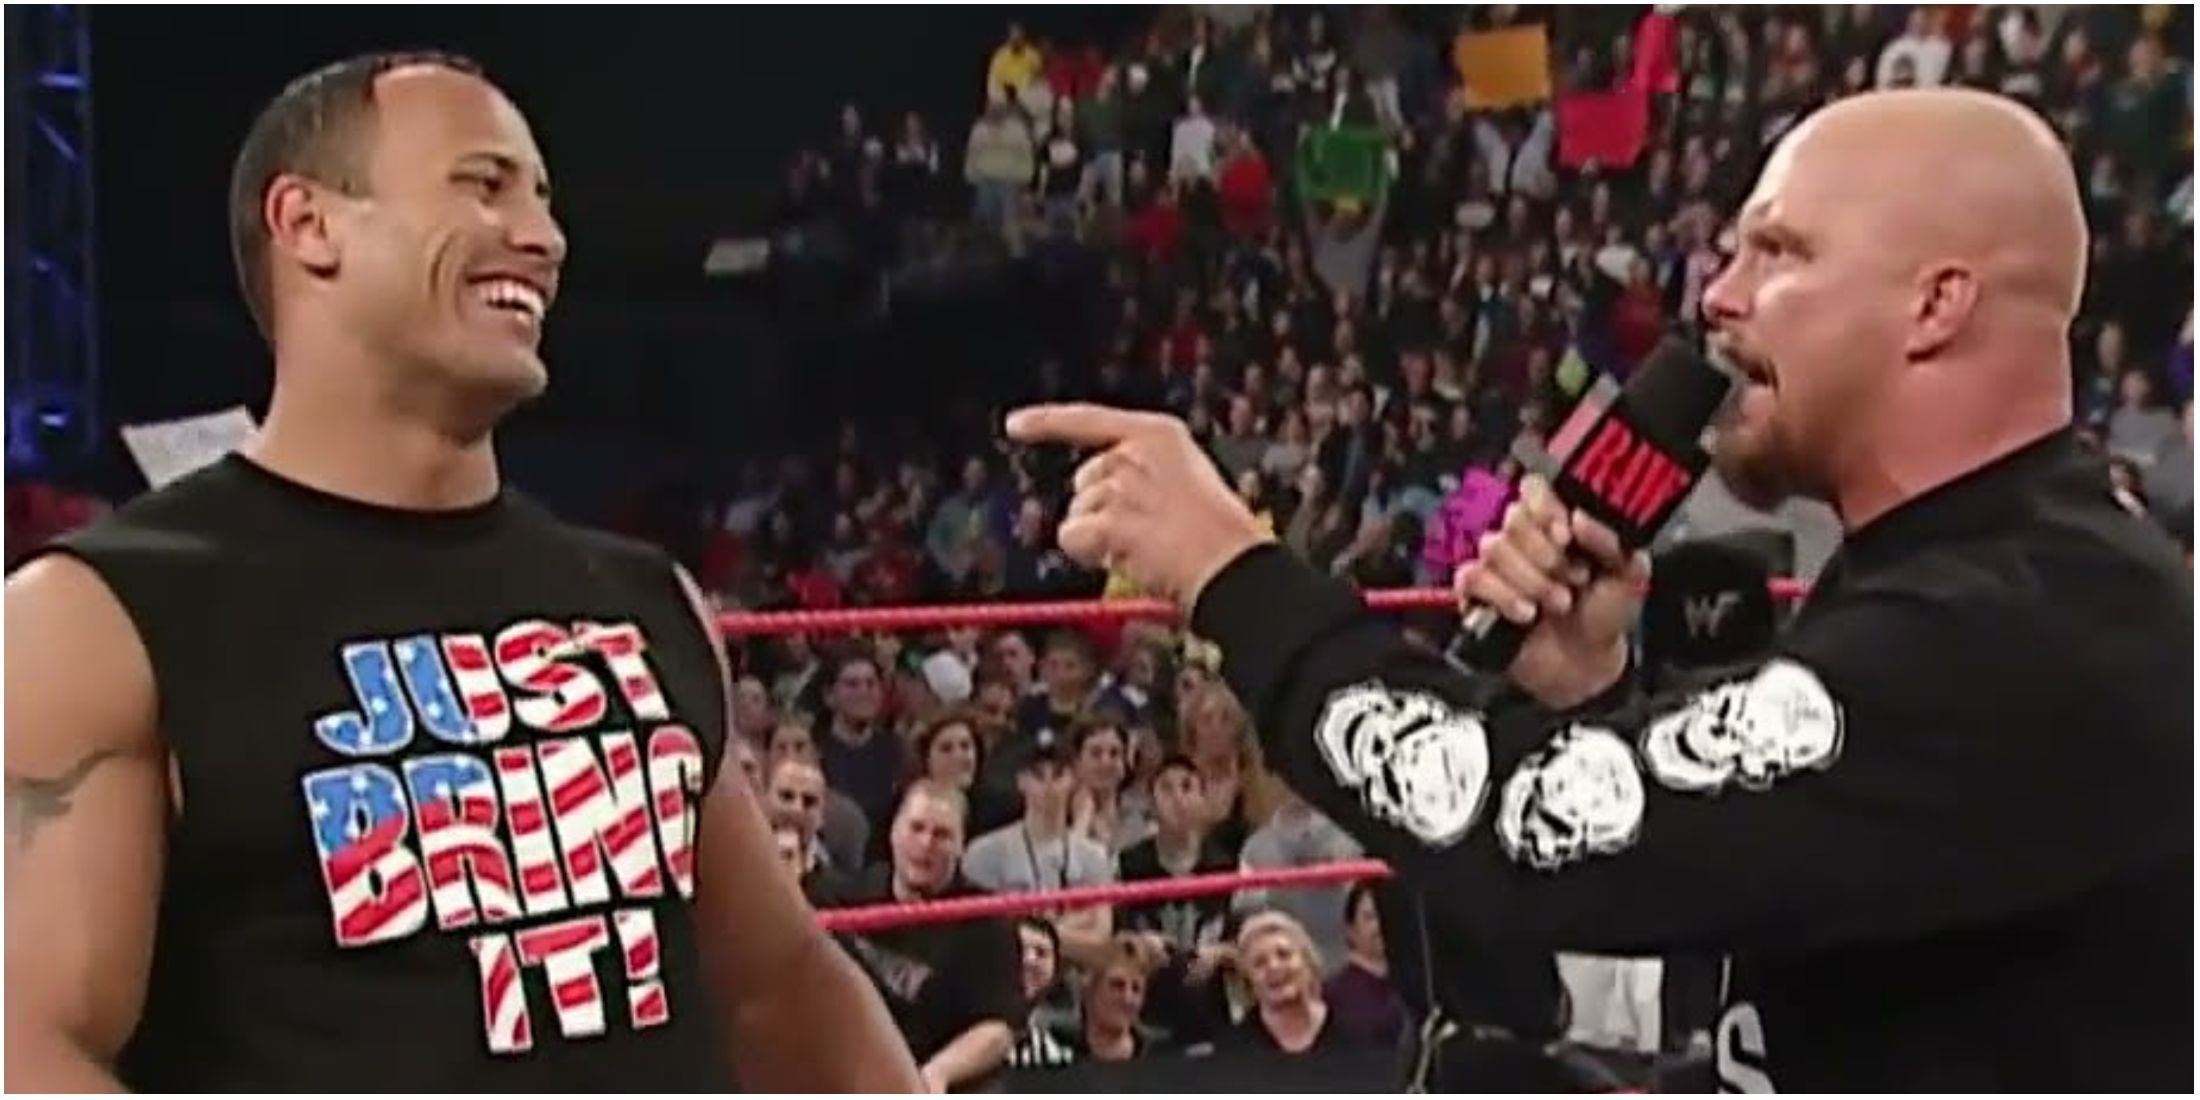 Stone Cold and The Rock's 2001 sing-a-long was just great TV